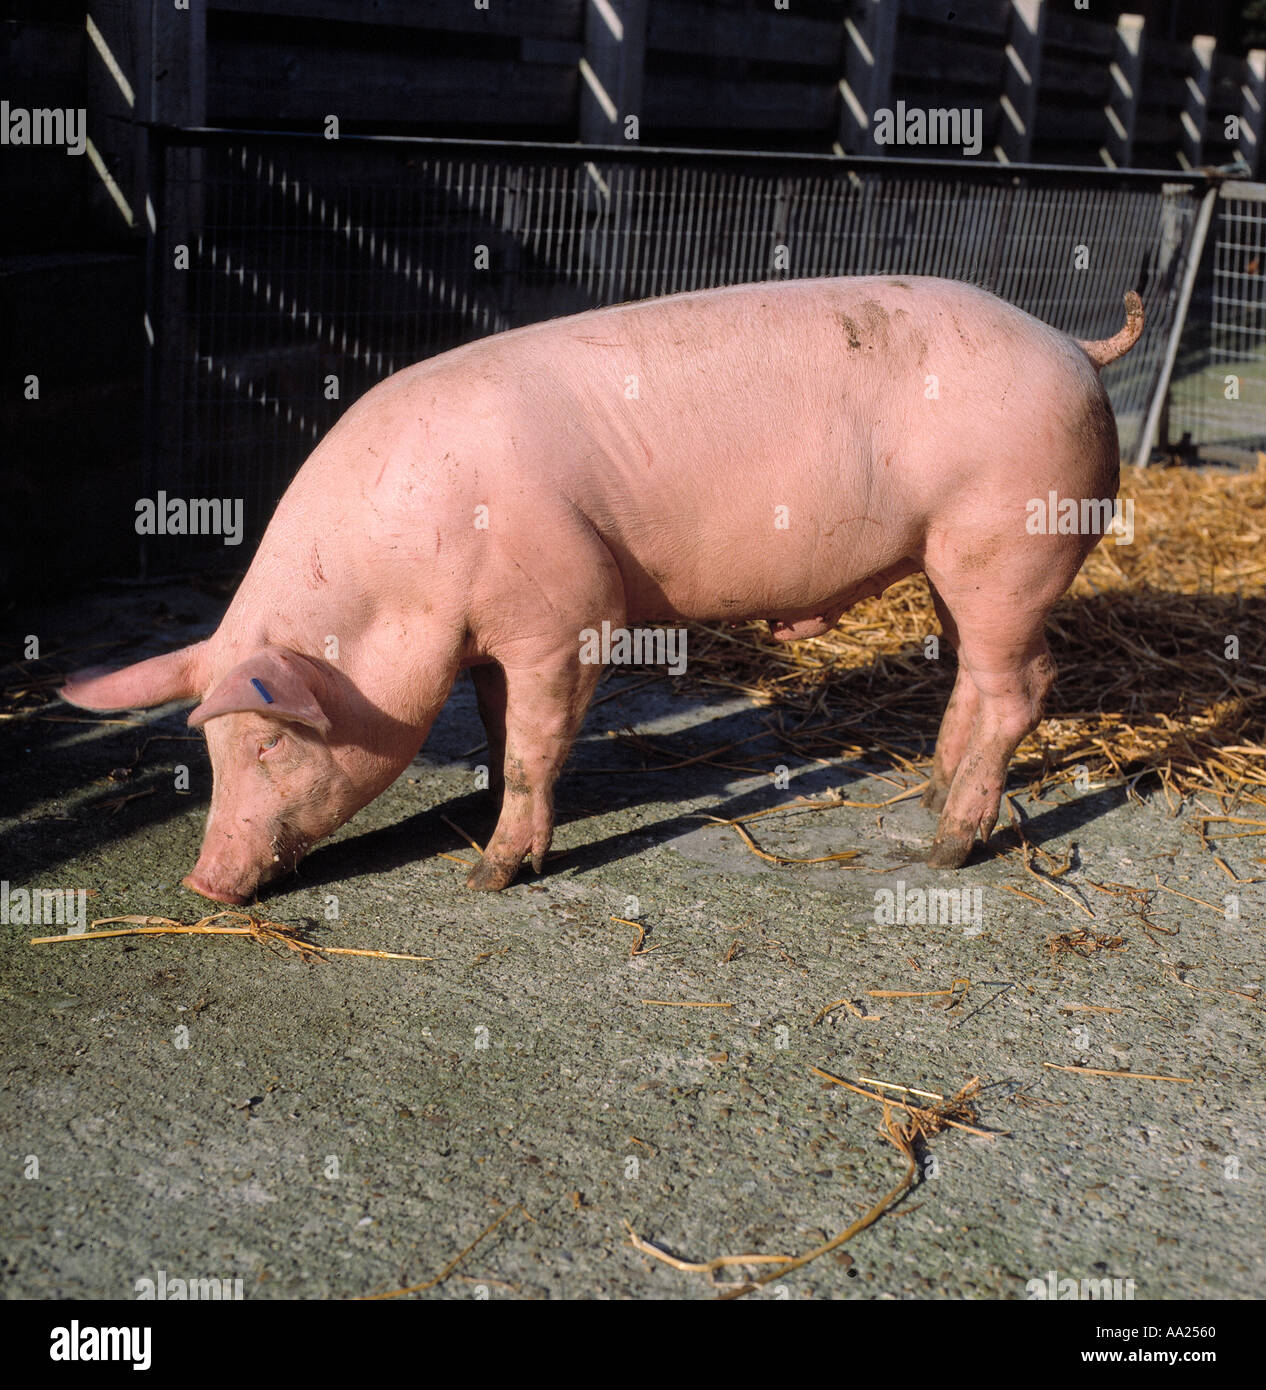 A large white pig finisher in an outdoor pen Stock Photo